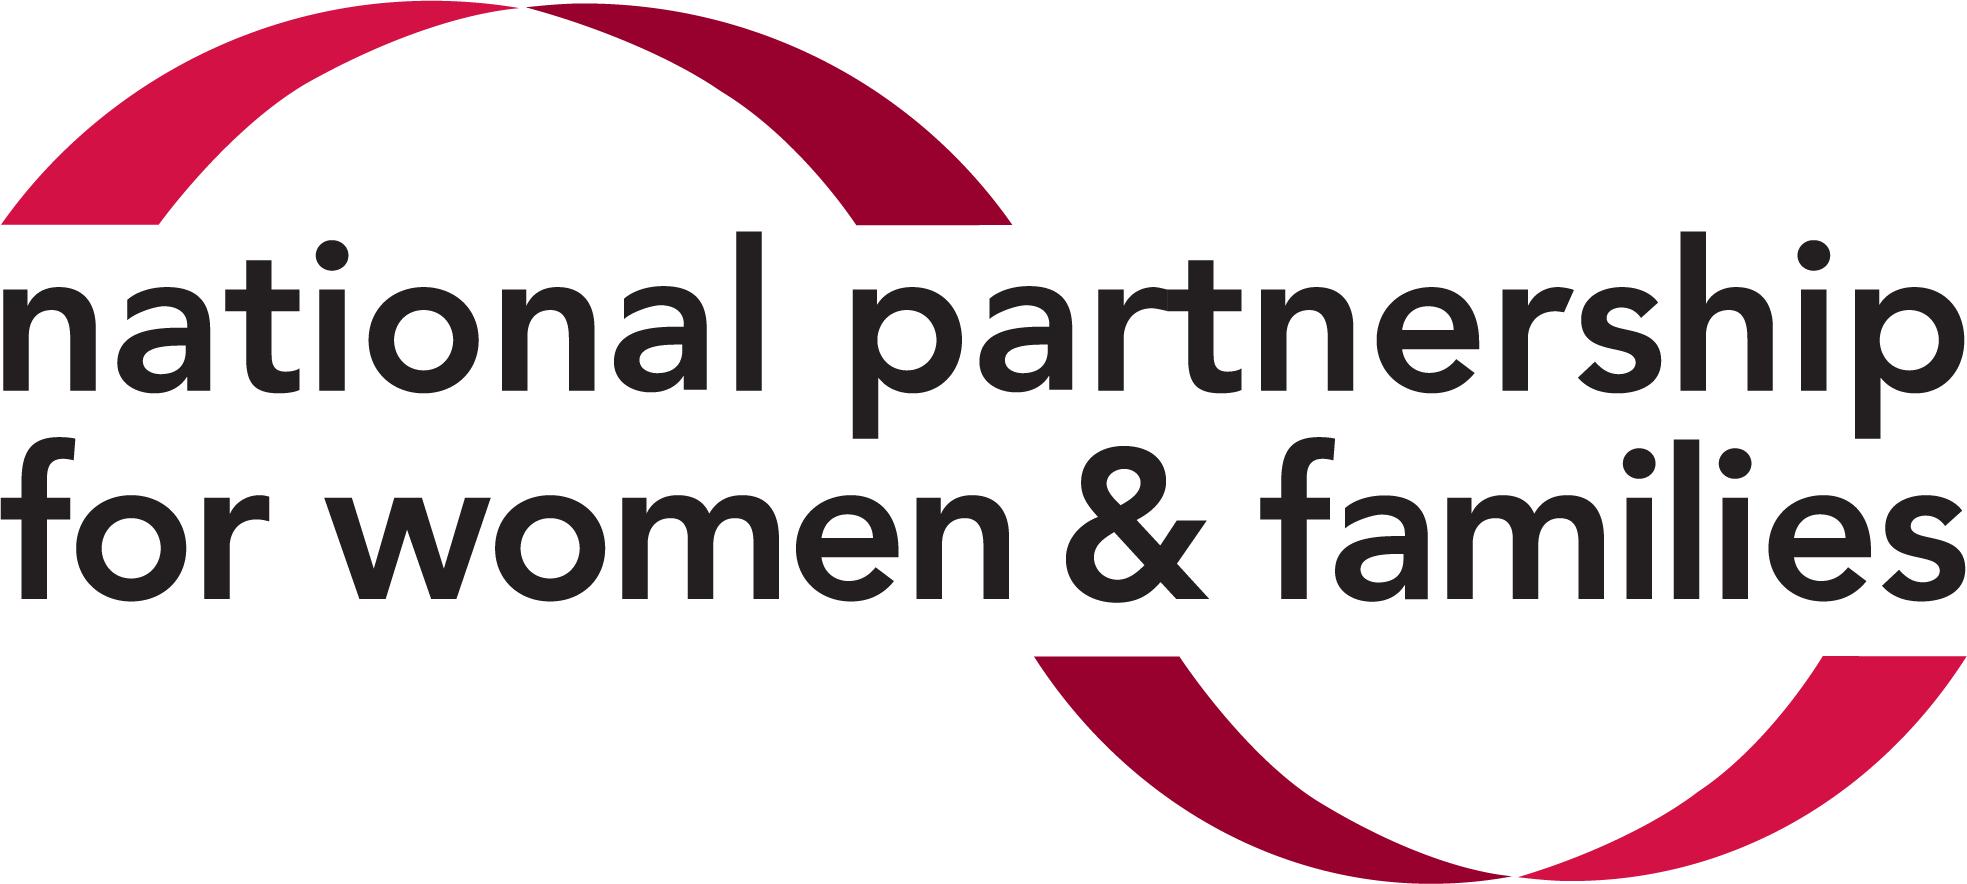 National Partnership For Women & Families.png